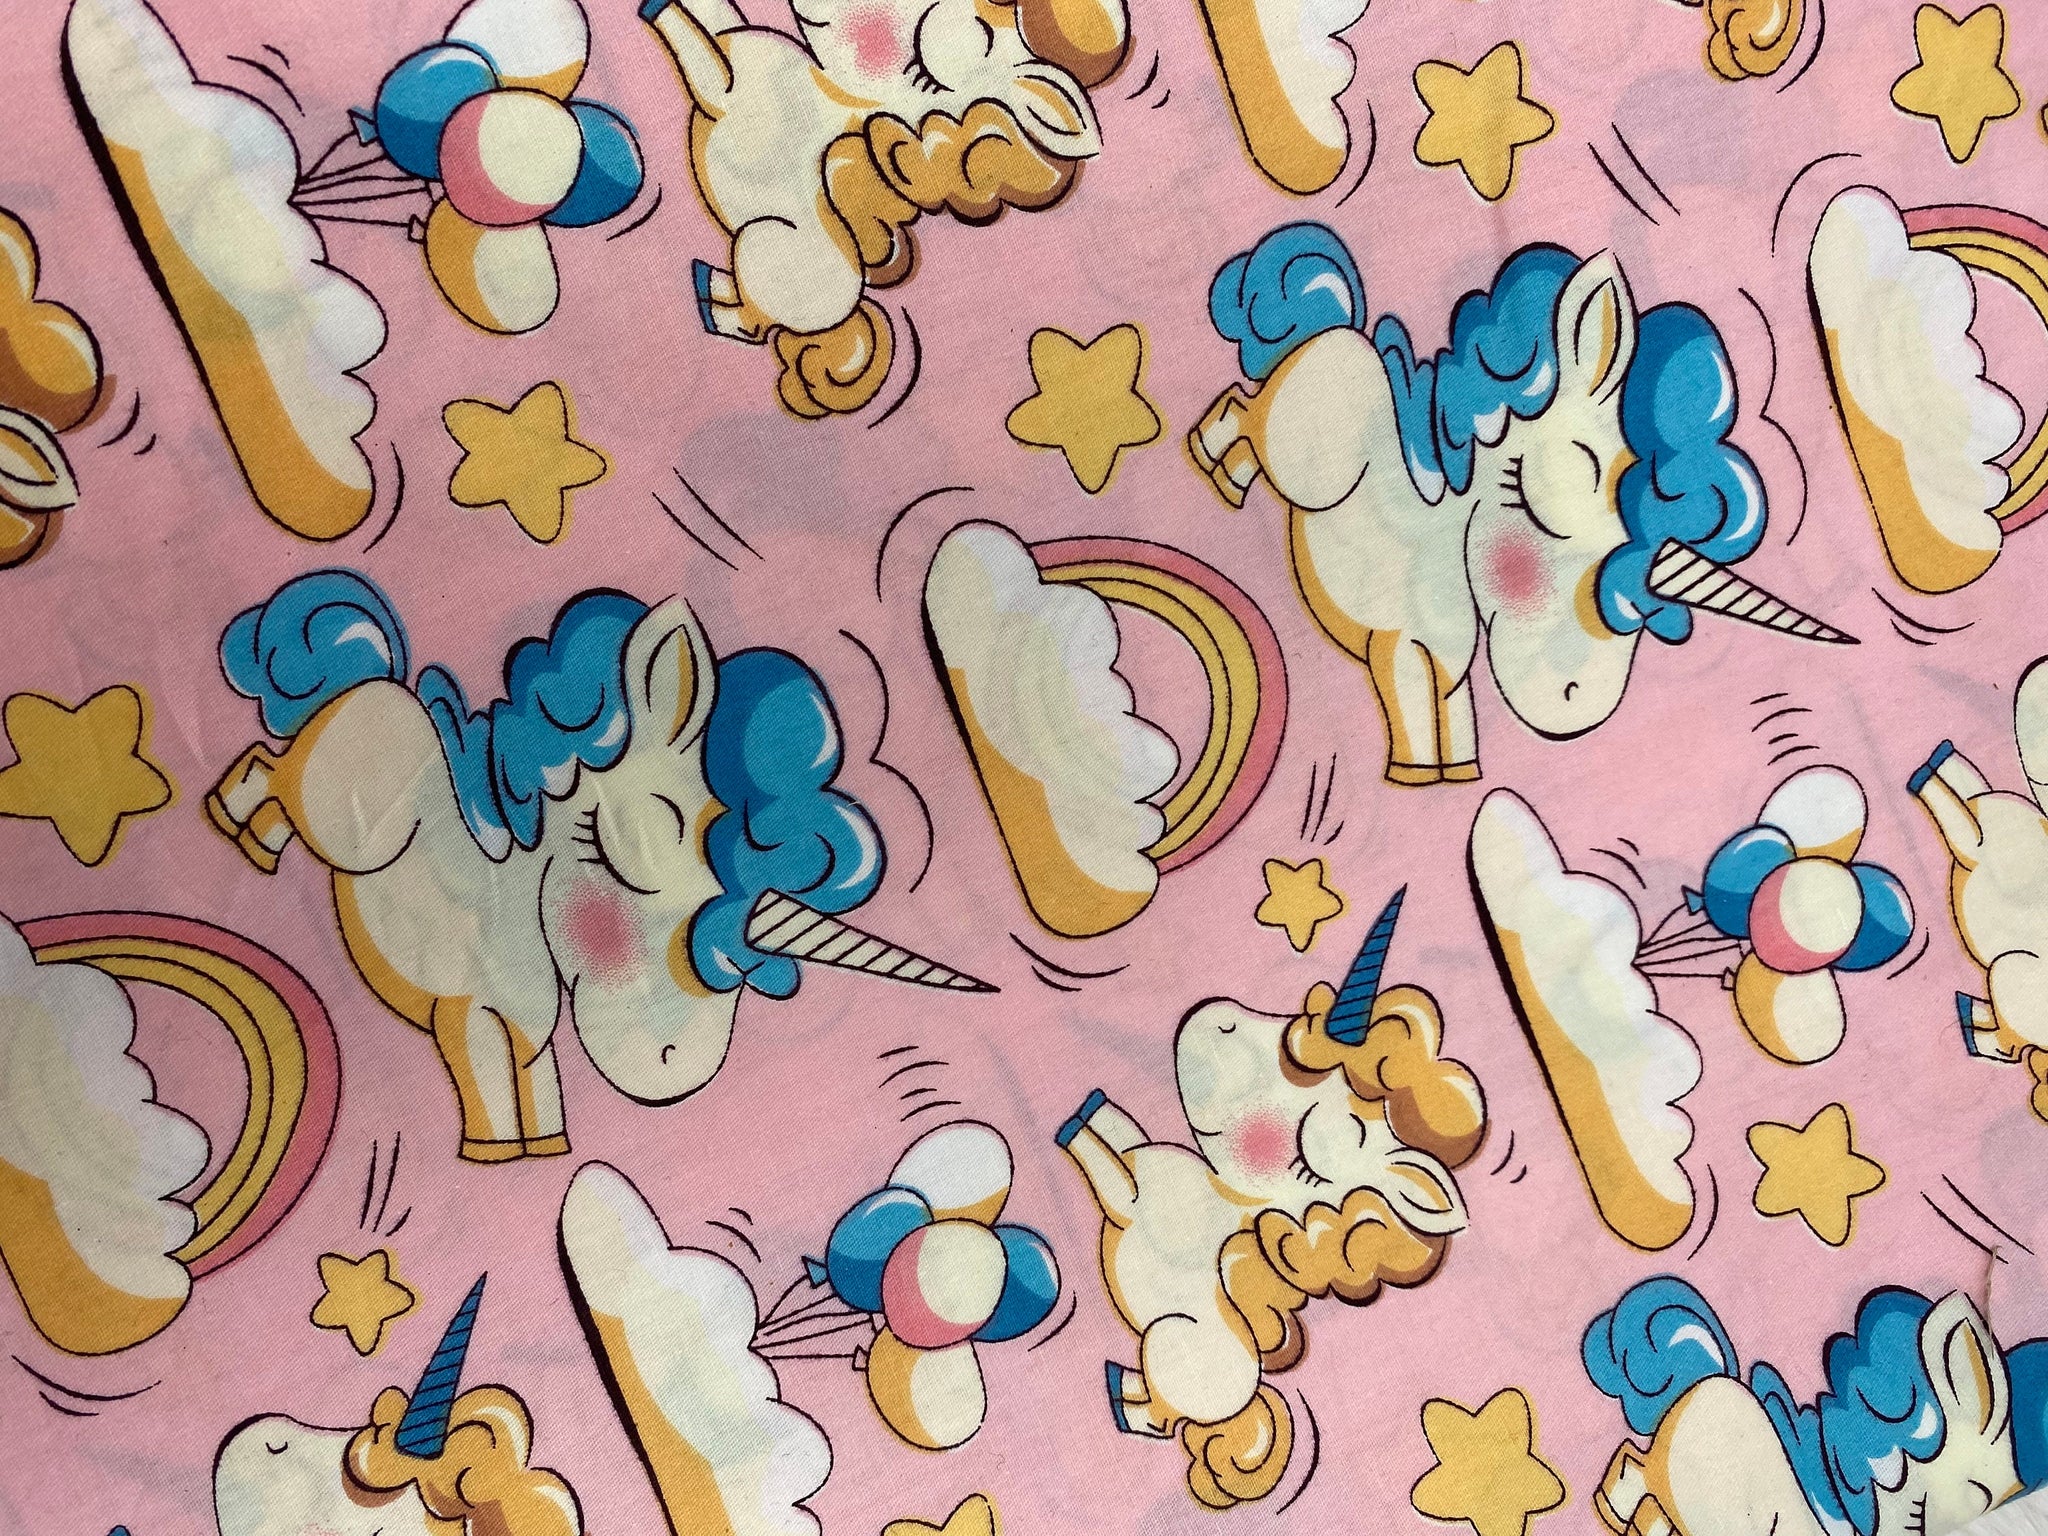 NEW,"Unicorn Balloons", 100% Ribbed Cotton Fabric, Boutique Fabric,Custom Made Kids Fabric for Masks, Accessories,Bedding & More, 1 Yard